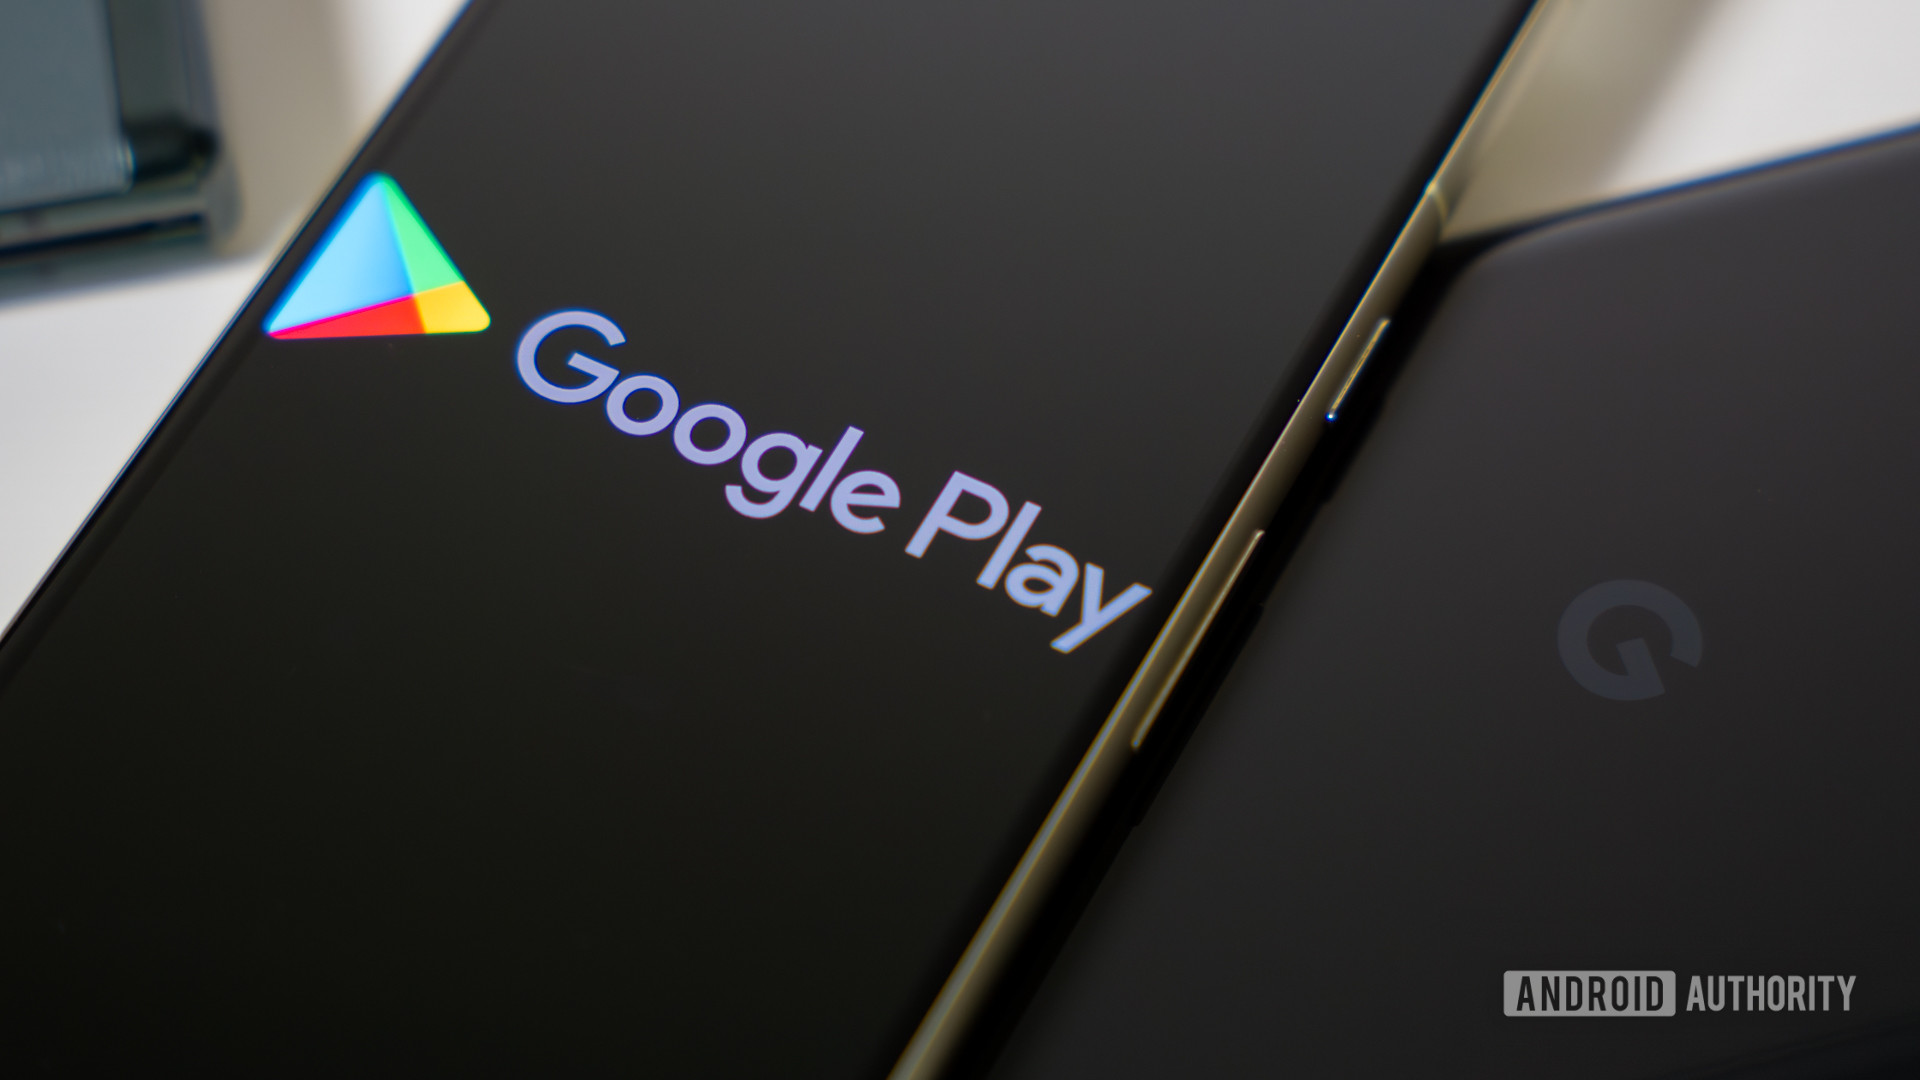 Google Play Store widely rolls out new ‘App highlights’ feature